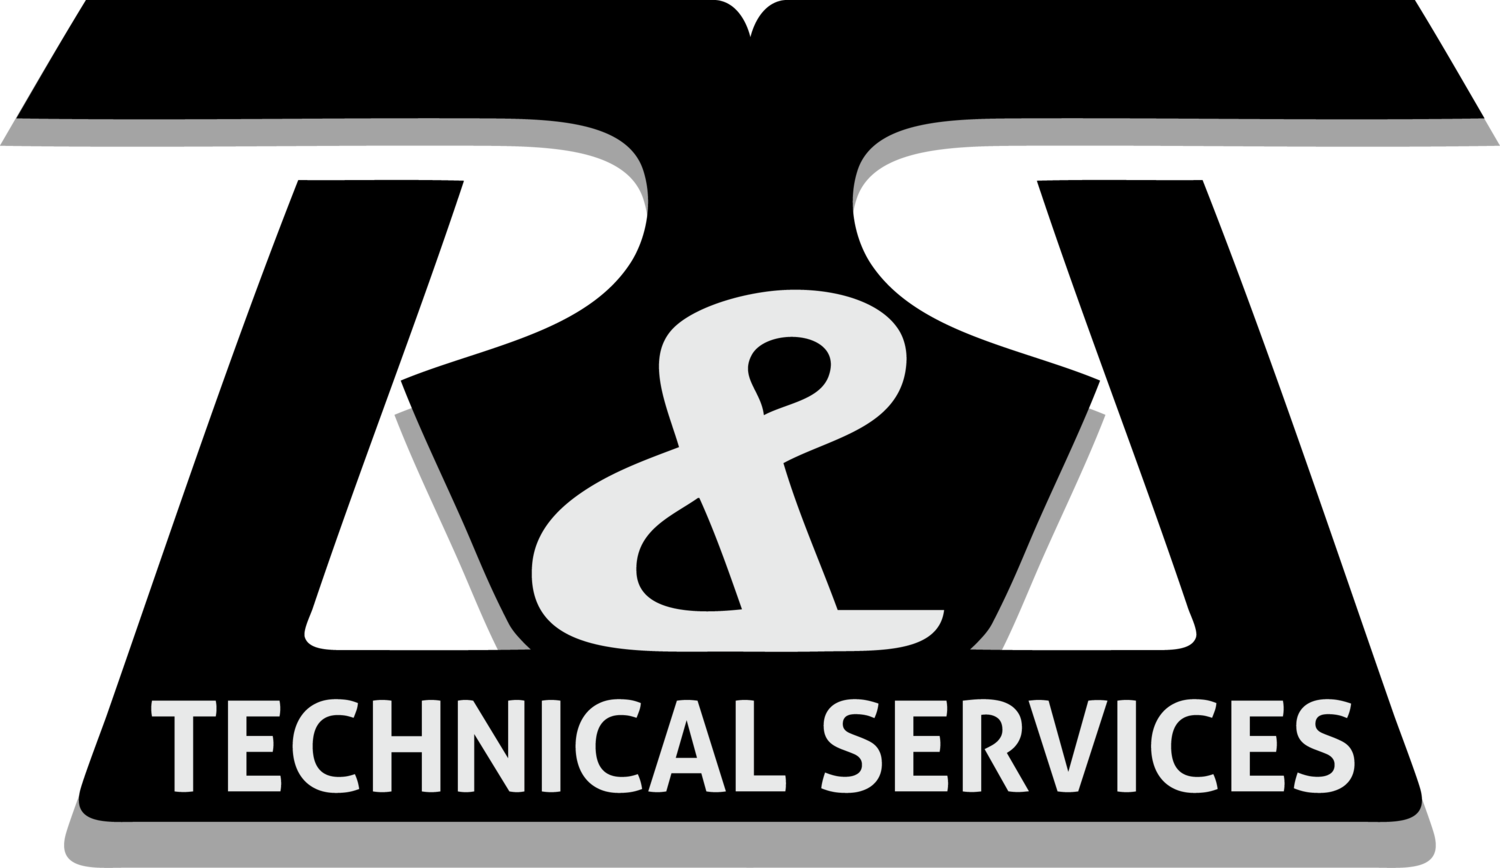 R&R Technical Services 